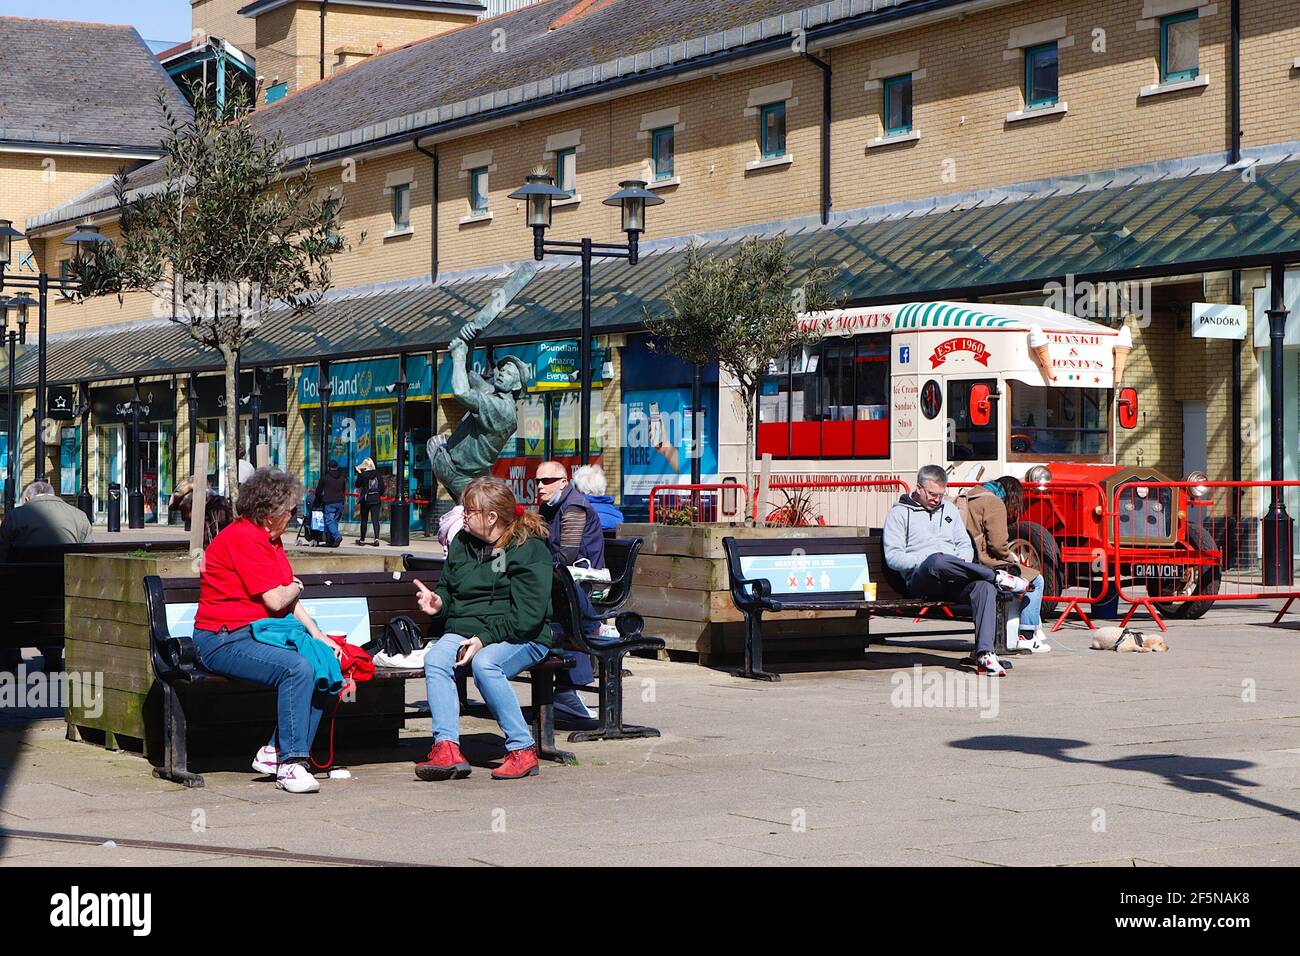 Hastings, East Sussex, UK. 27 Mar, 2021. UK Weather: People sitting on benches enjoying the sunshine in priory meadow shopping centre, queens square. Photo Credit: Paul Lawrenson /Alamy Live News Stock Photo